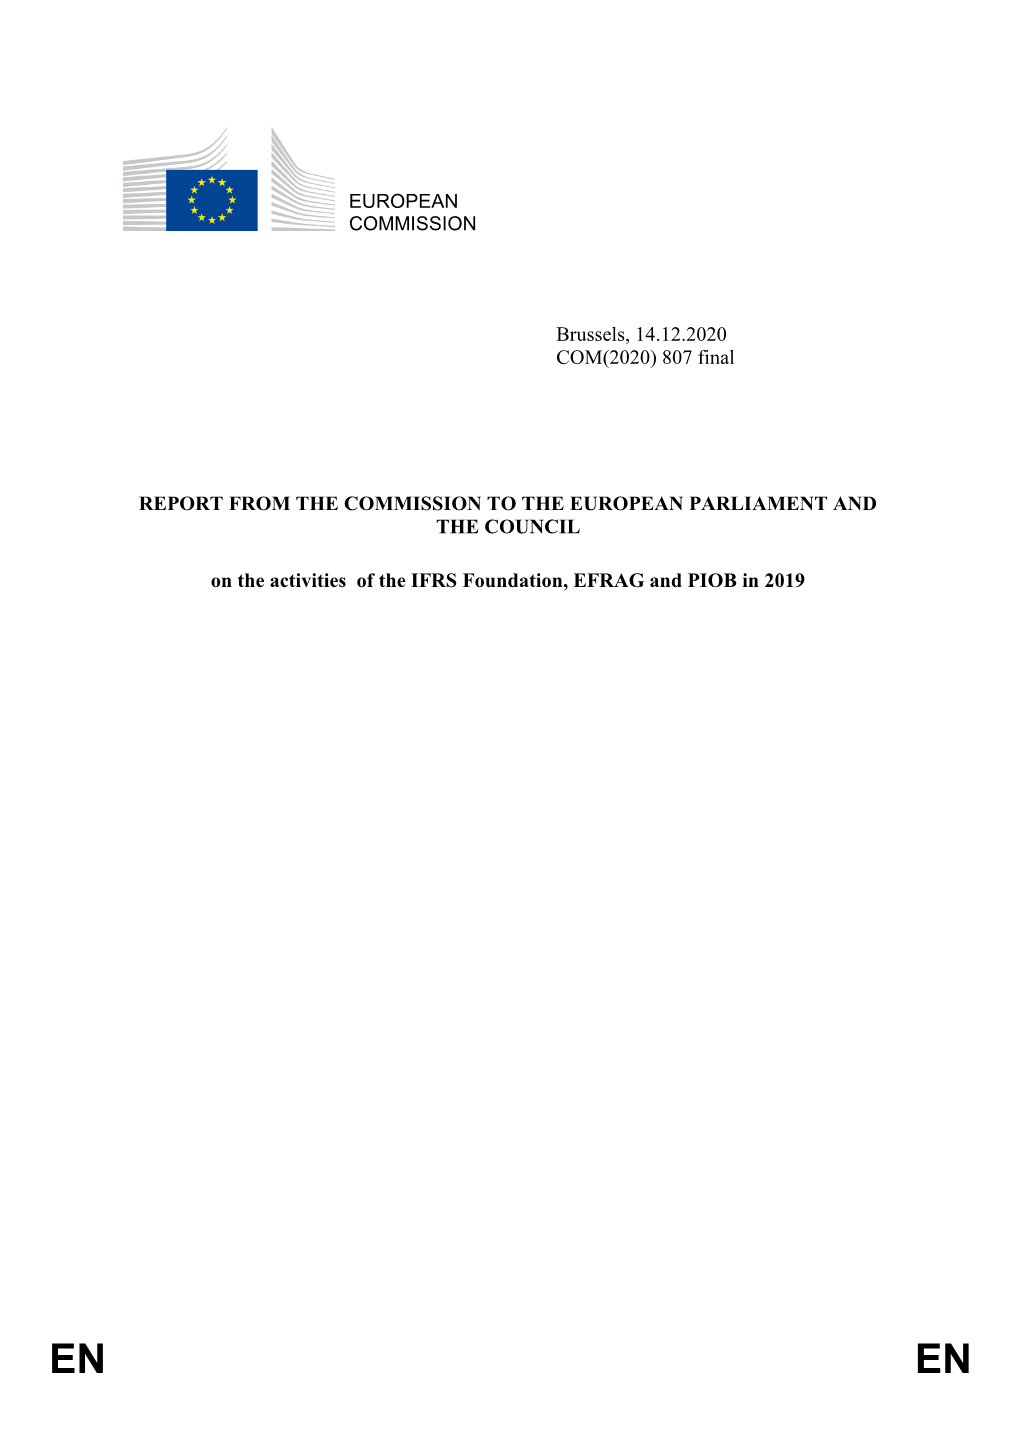 Report from EC to EP and Council on the Activities of IFRSF, EFRAG And